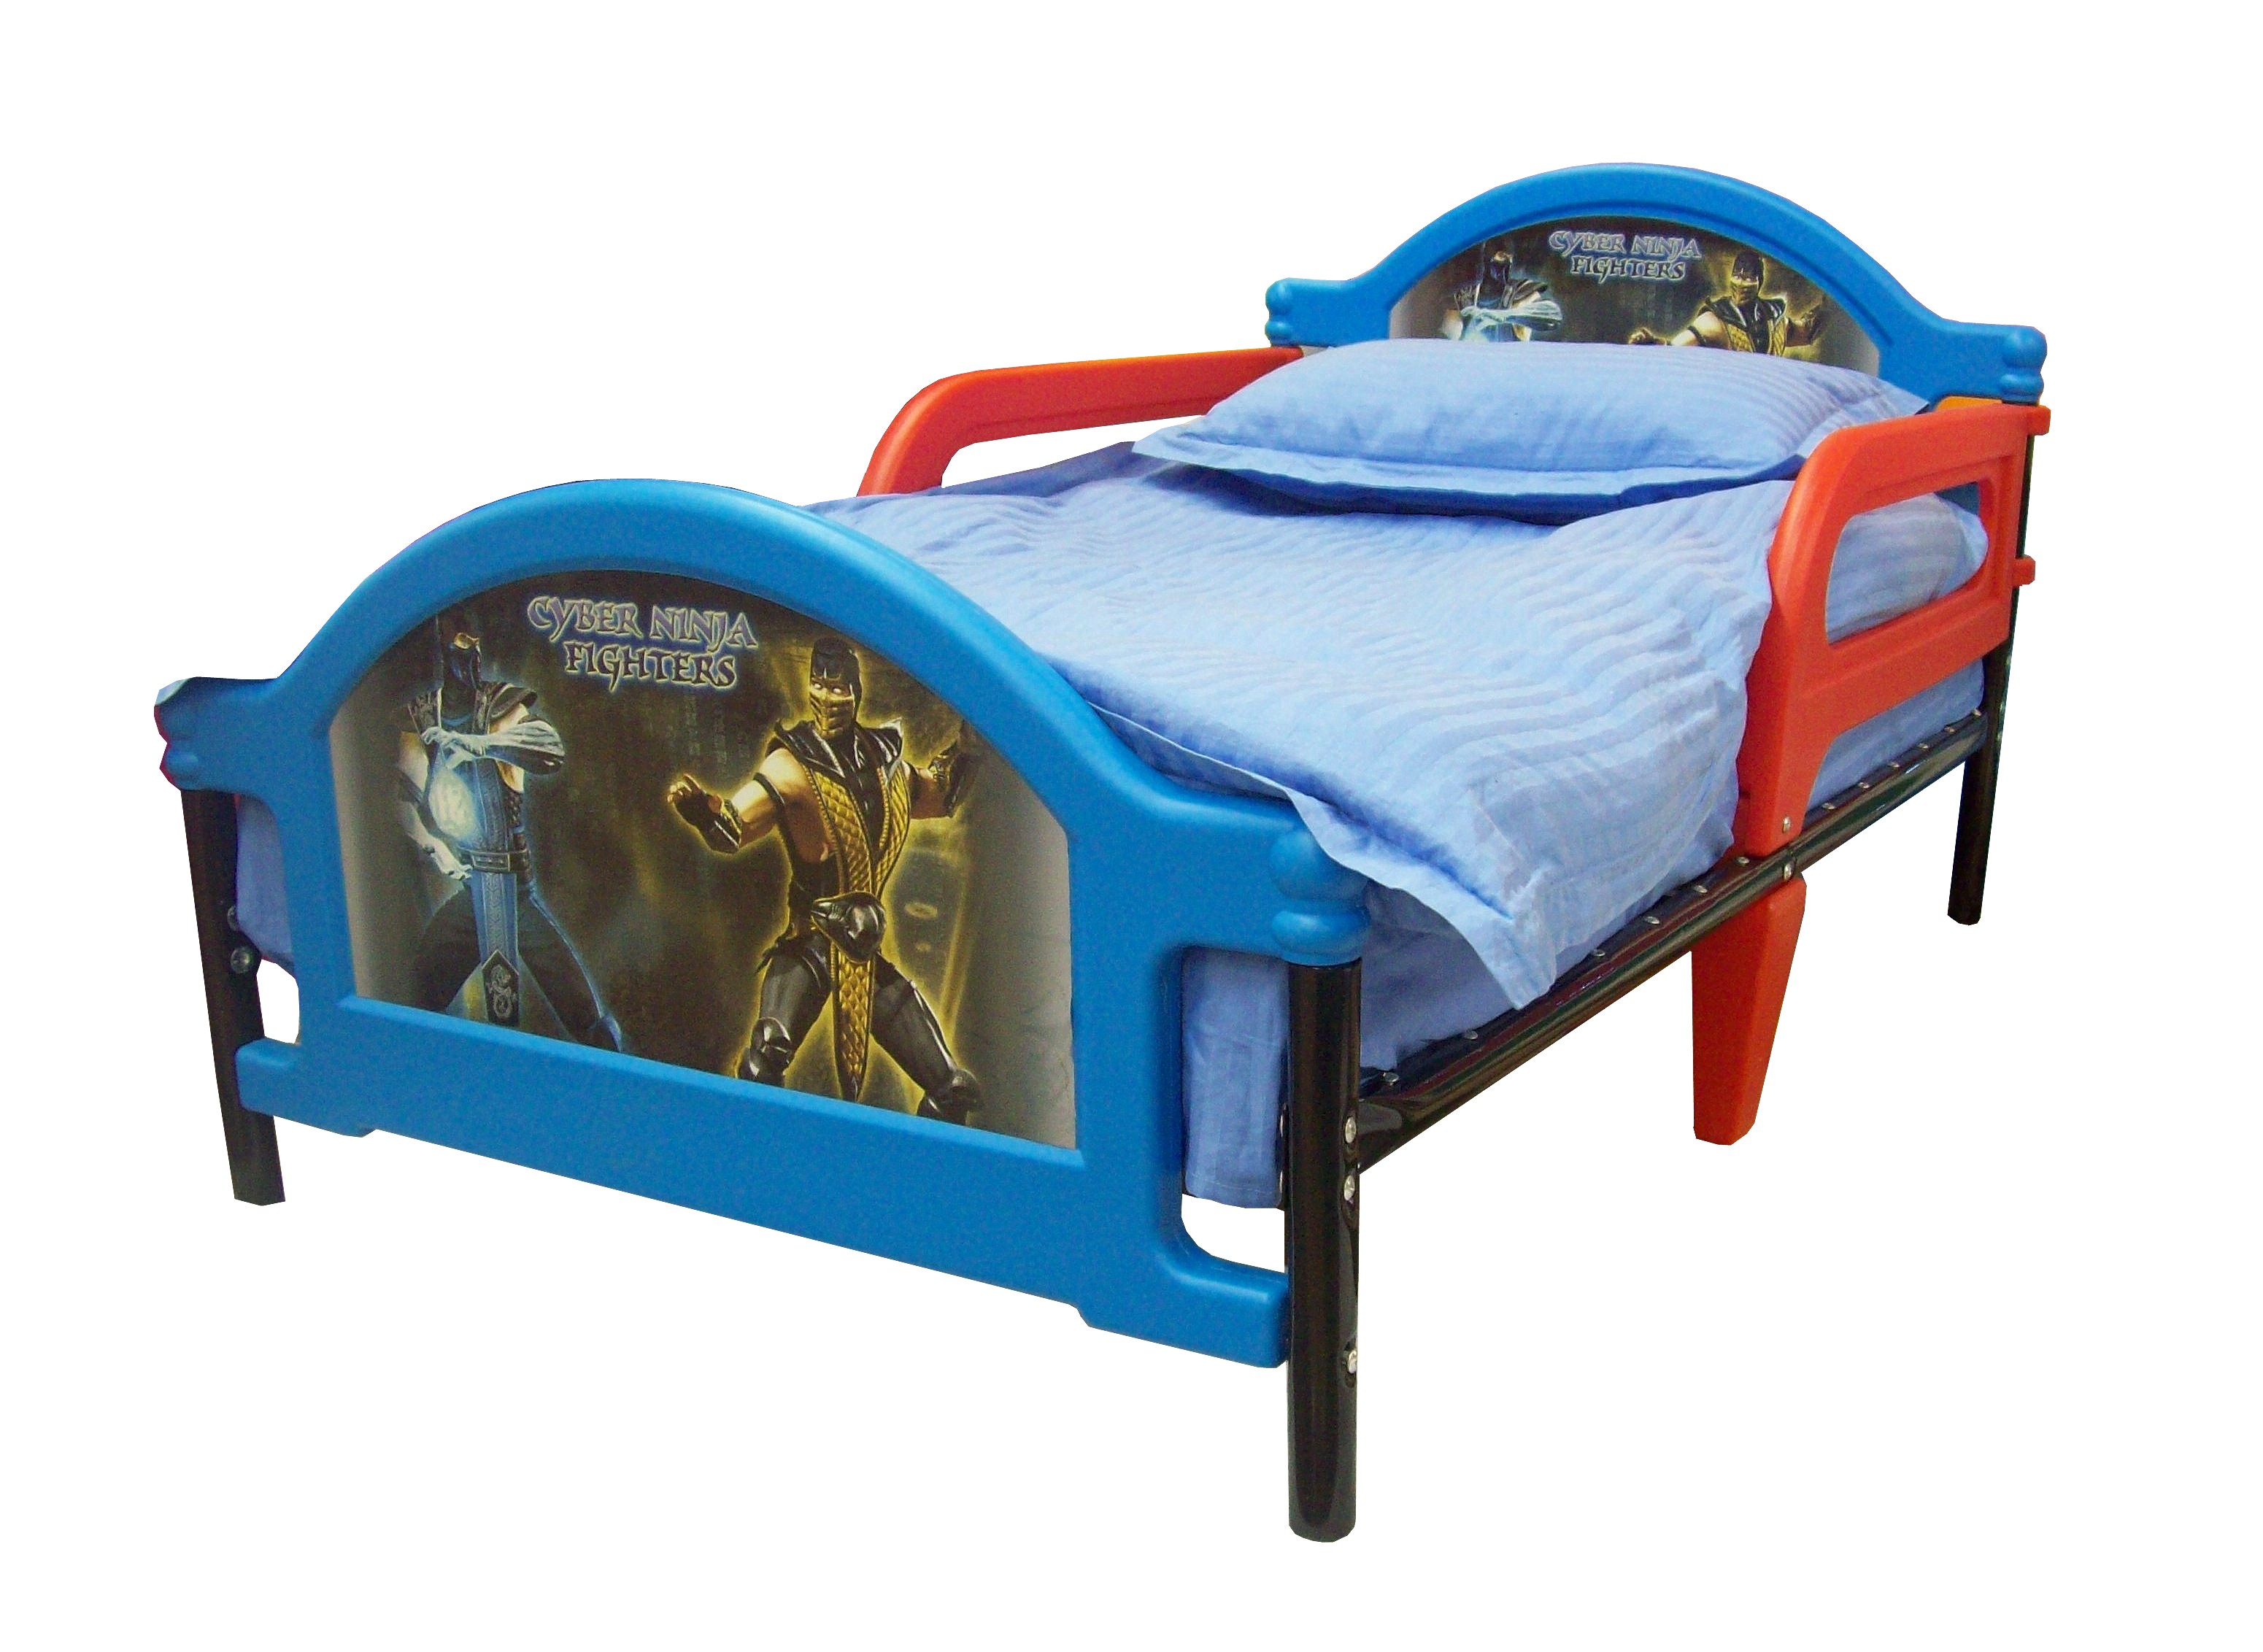 Plastic beds with sides for the child